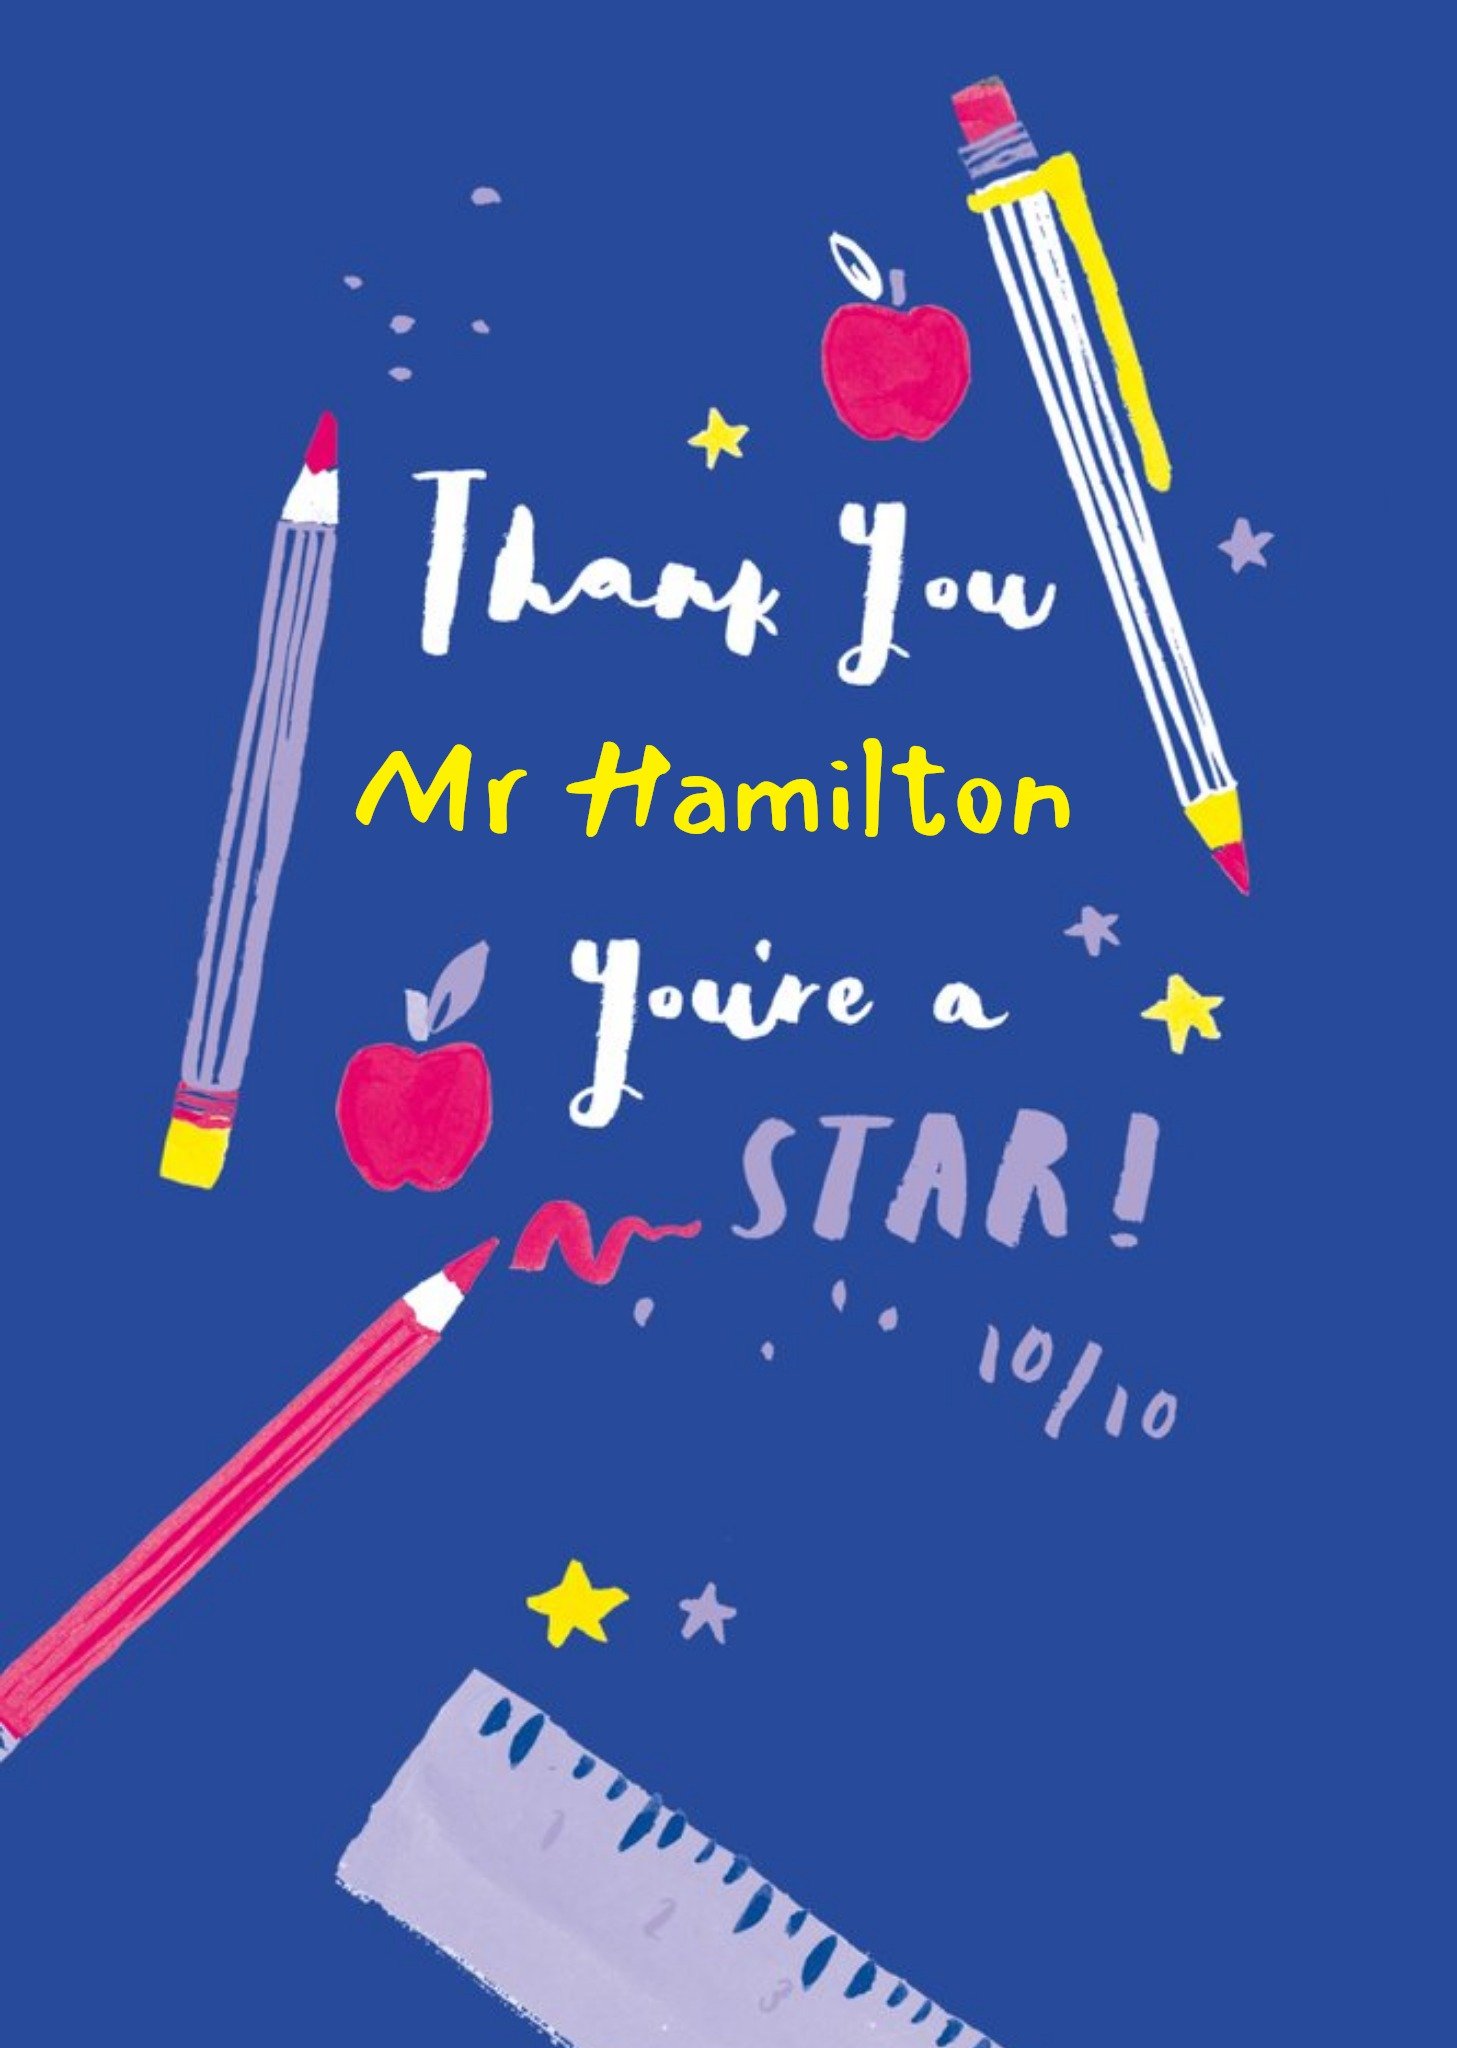 Moonpig Handwritten Typography Surrounded By Stationery On A Blue Background Teacher's Thank You Car